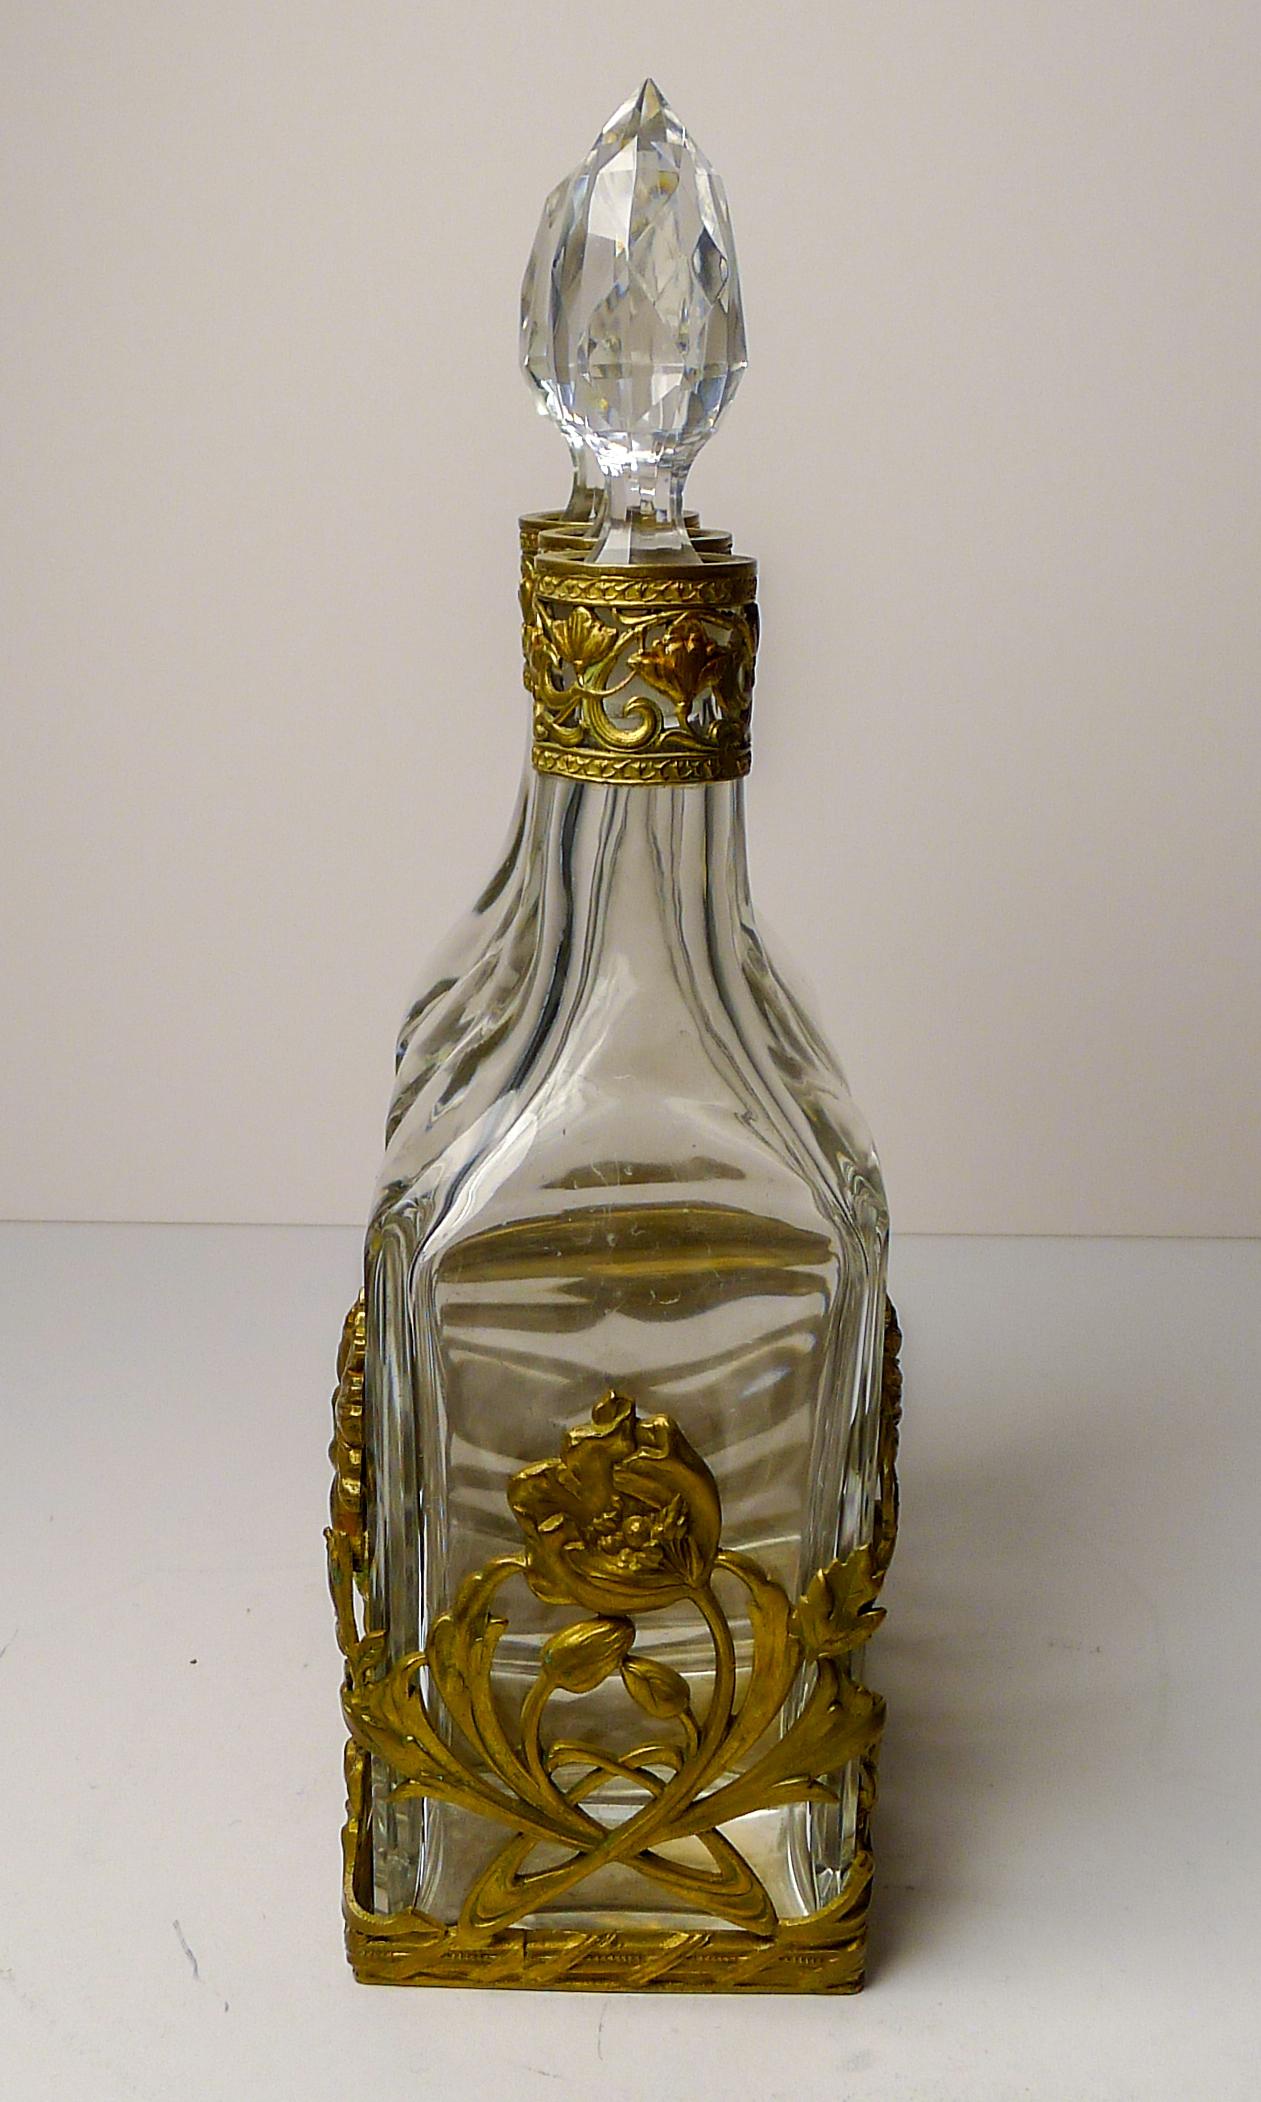 French Art Nouveau Liquor Decanter Set / Perfume Caddy c.1900 In Good Condition For Sale In Bath, GB